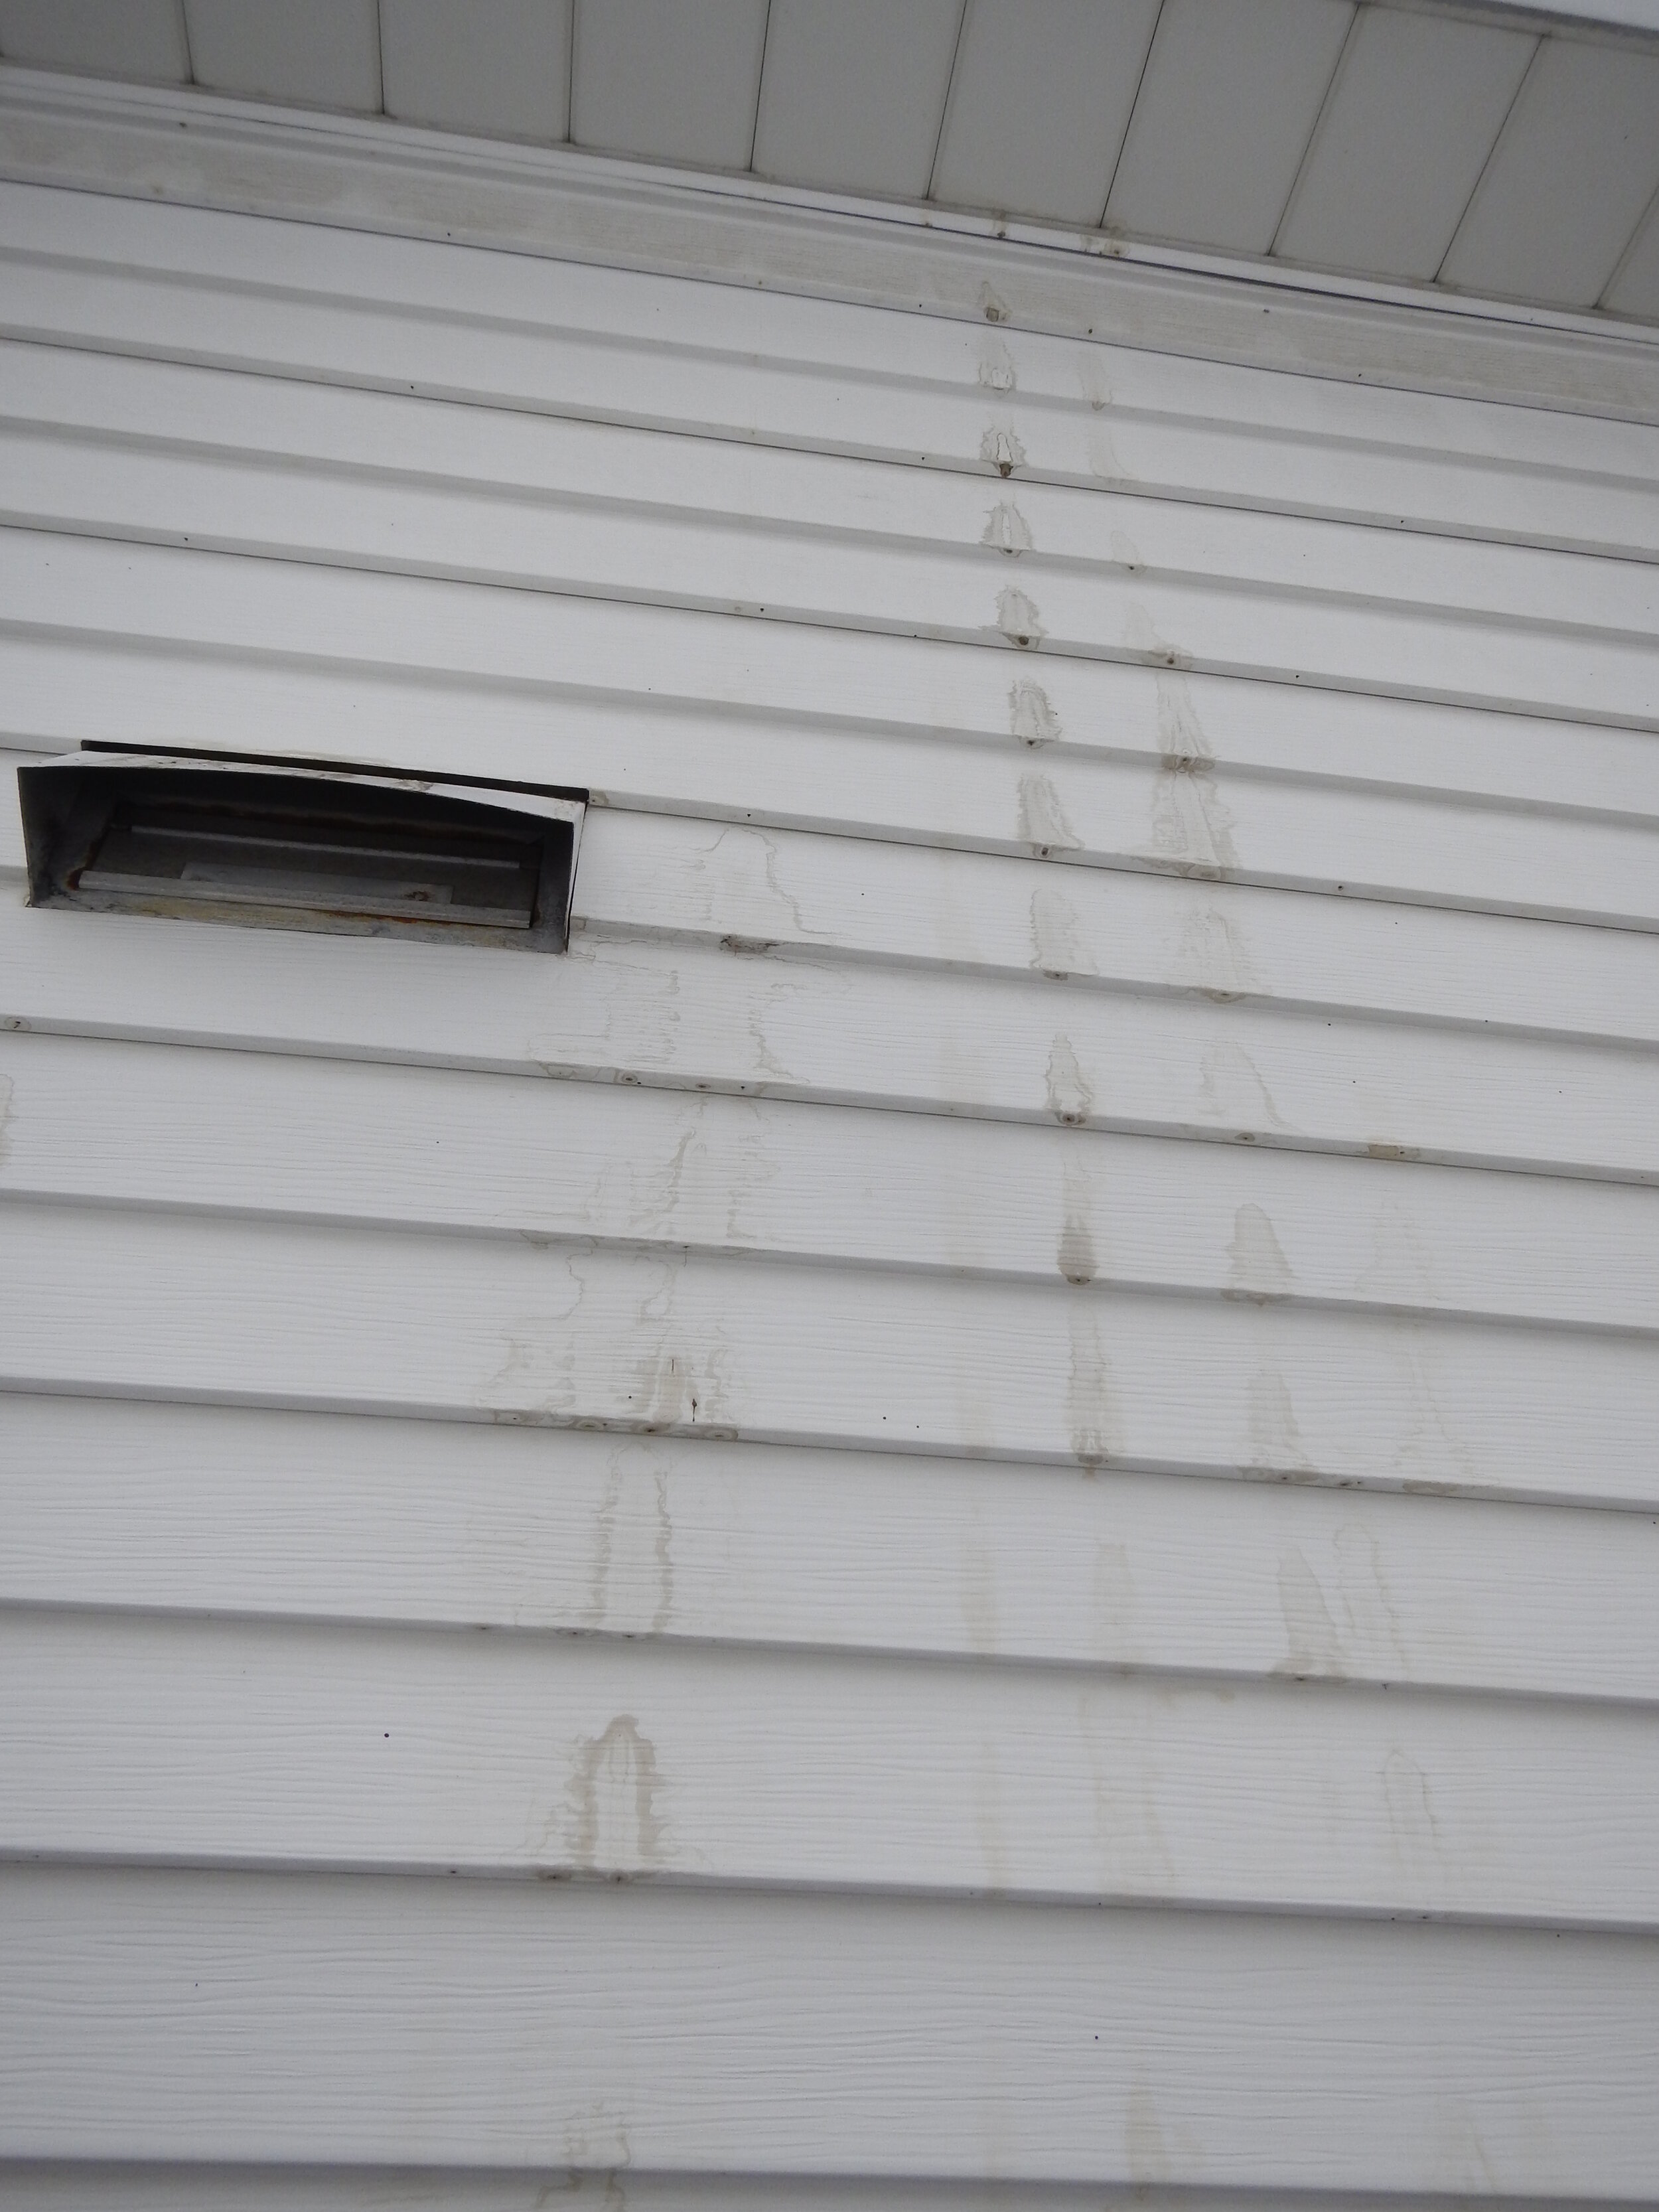 Signs of Leakage from Ice Dams